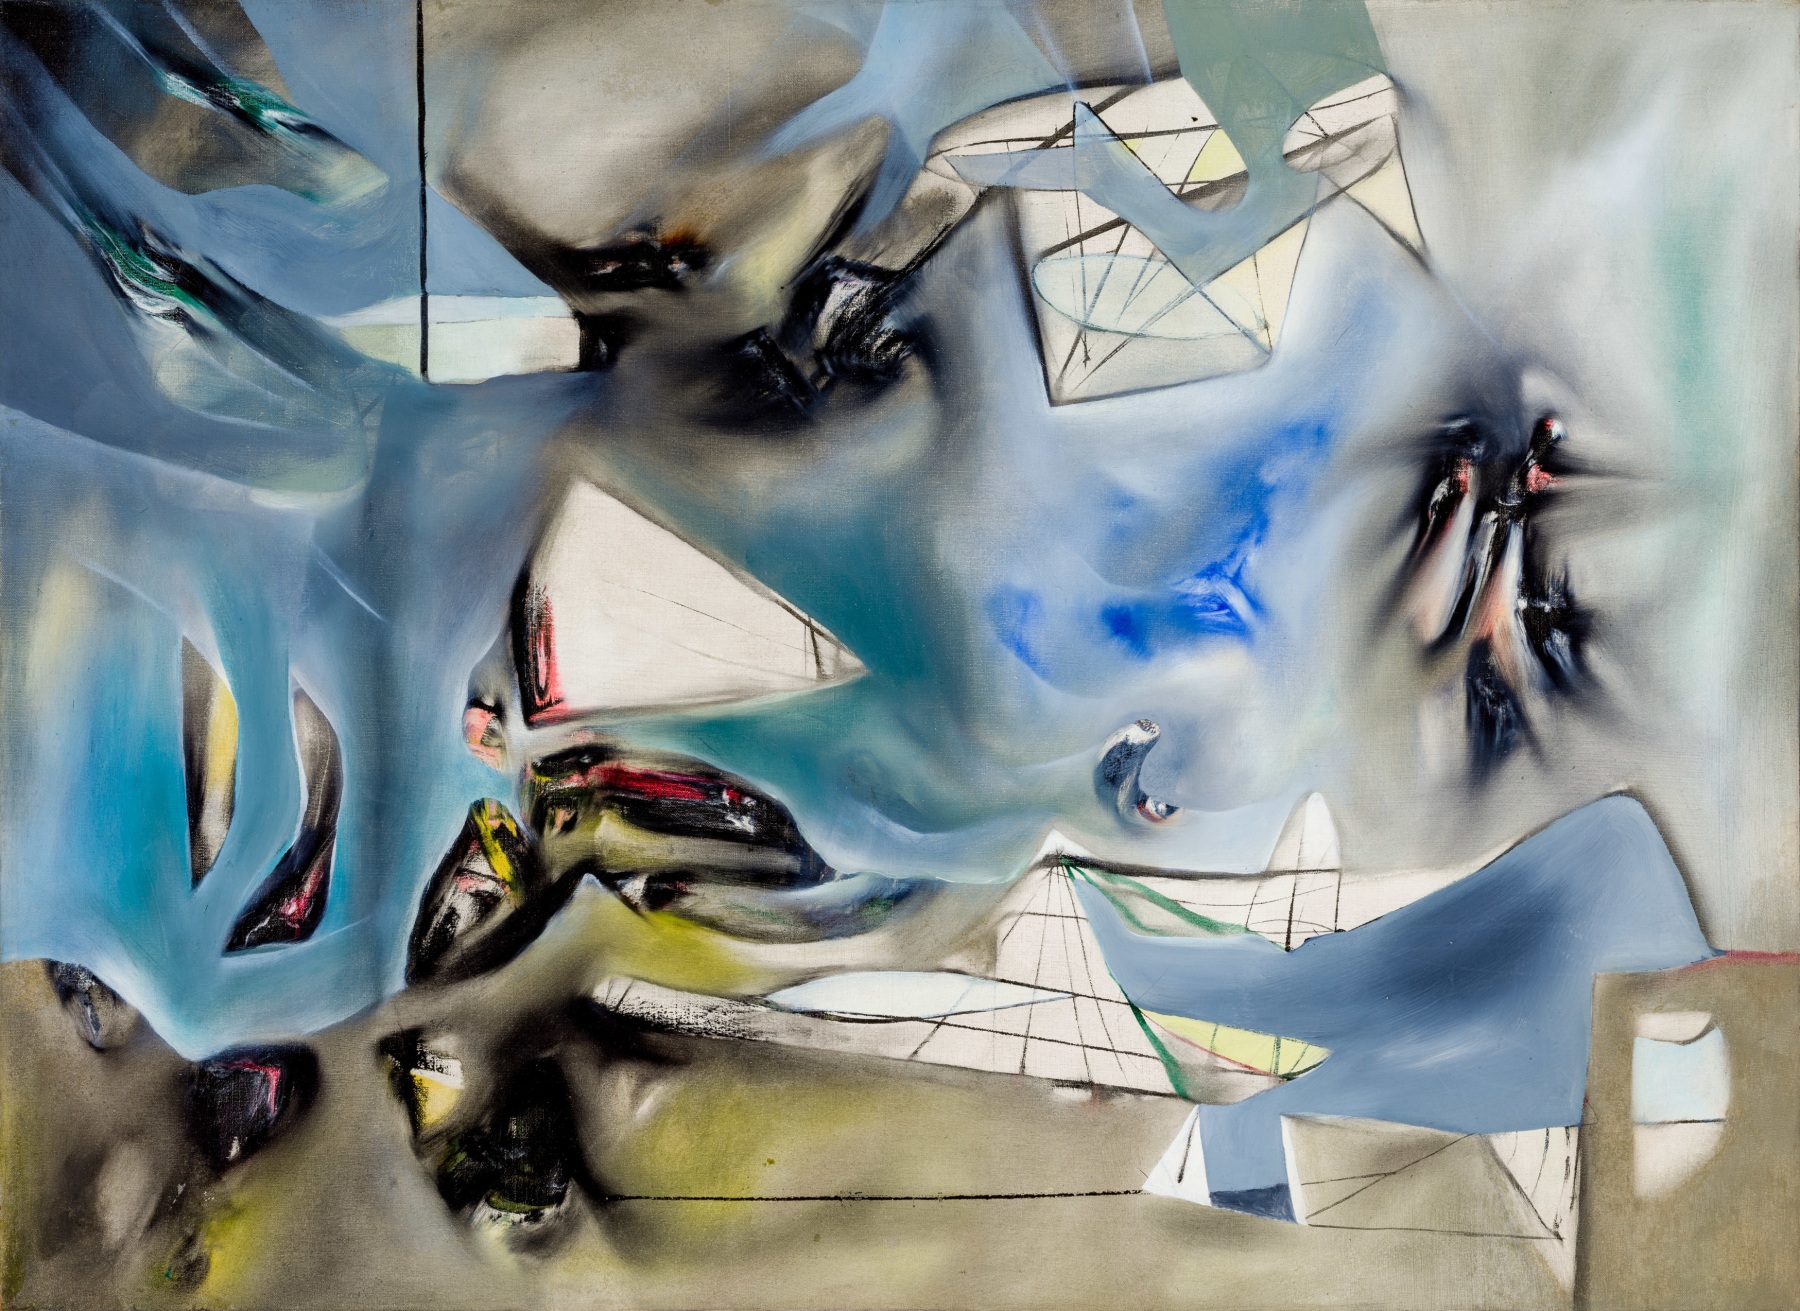 Matta. Centro del agua (Center of Water). 1941. Oil on canvas, 54.7 by 74.5 cm (21&frac12; by 29⅜ in.). &copy; 2019 Artists Rights Society (ARS), New York / ADAGP, Paris